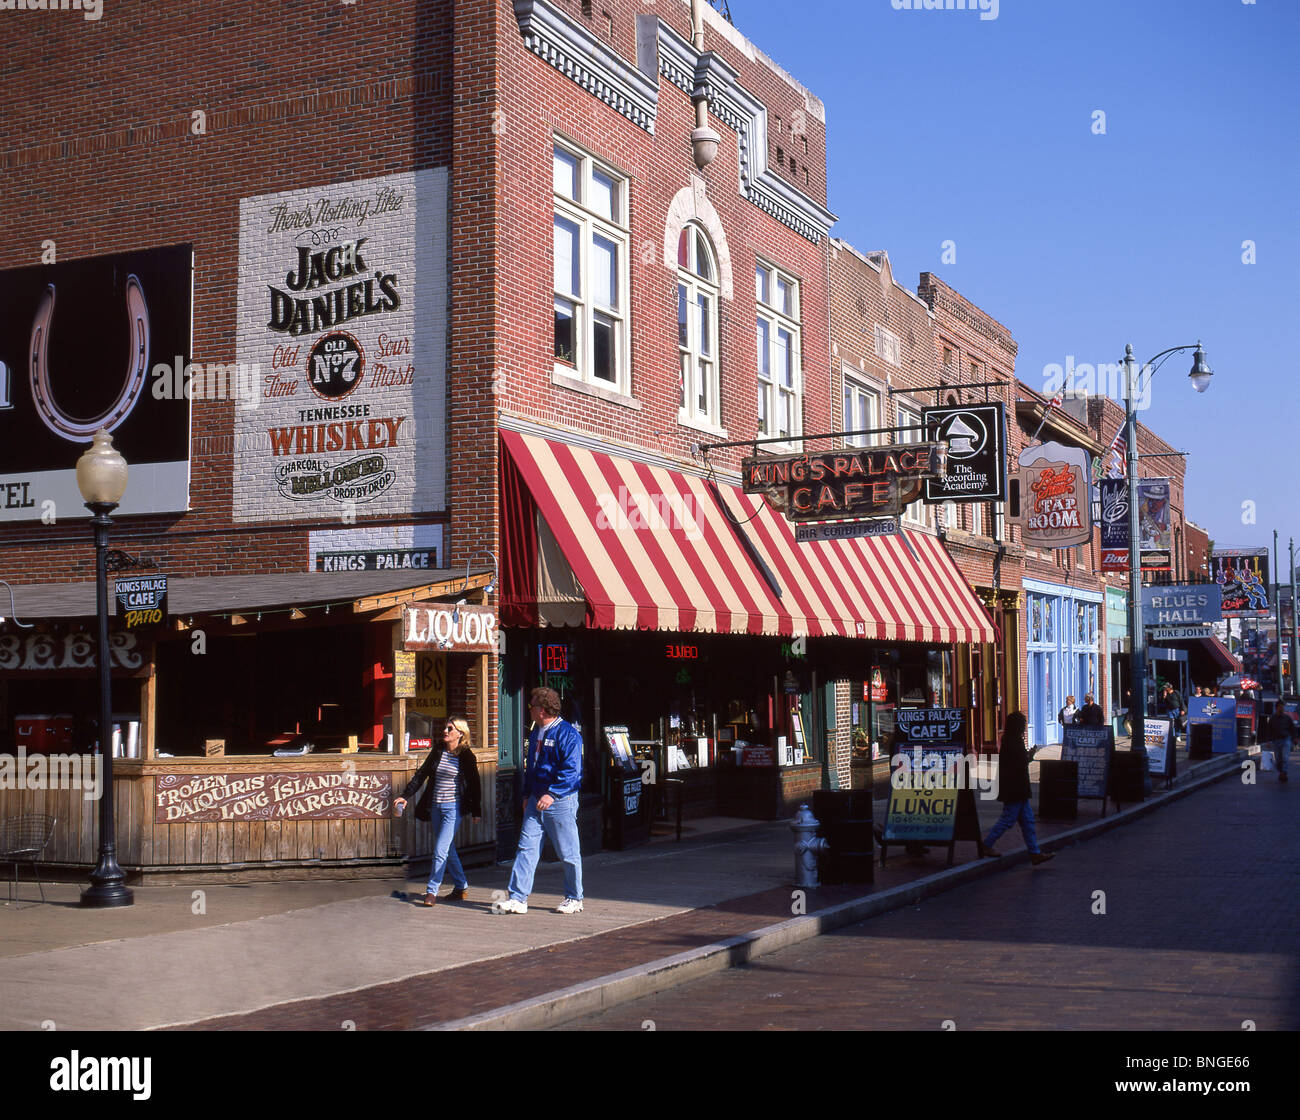 King's Palace Cafe and blues bars, Beale Street, Beale Street District, Memphis, Tennessee, United States of America Stock Photo